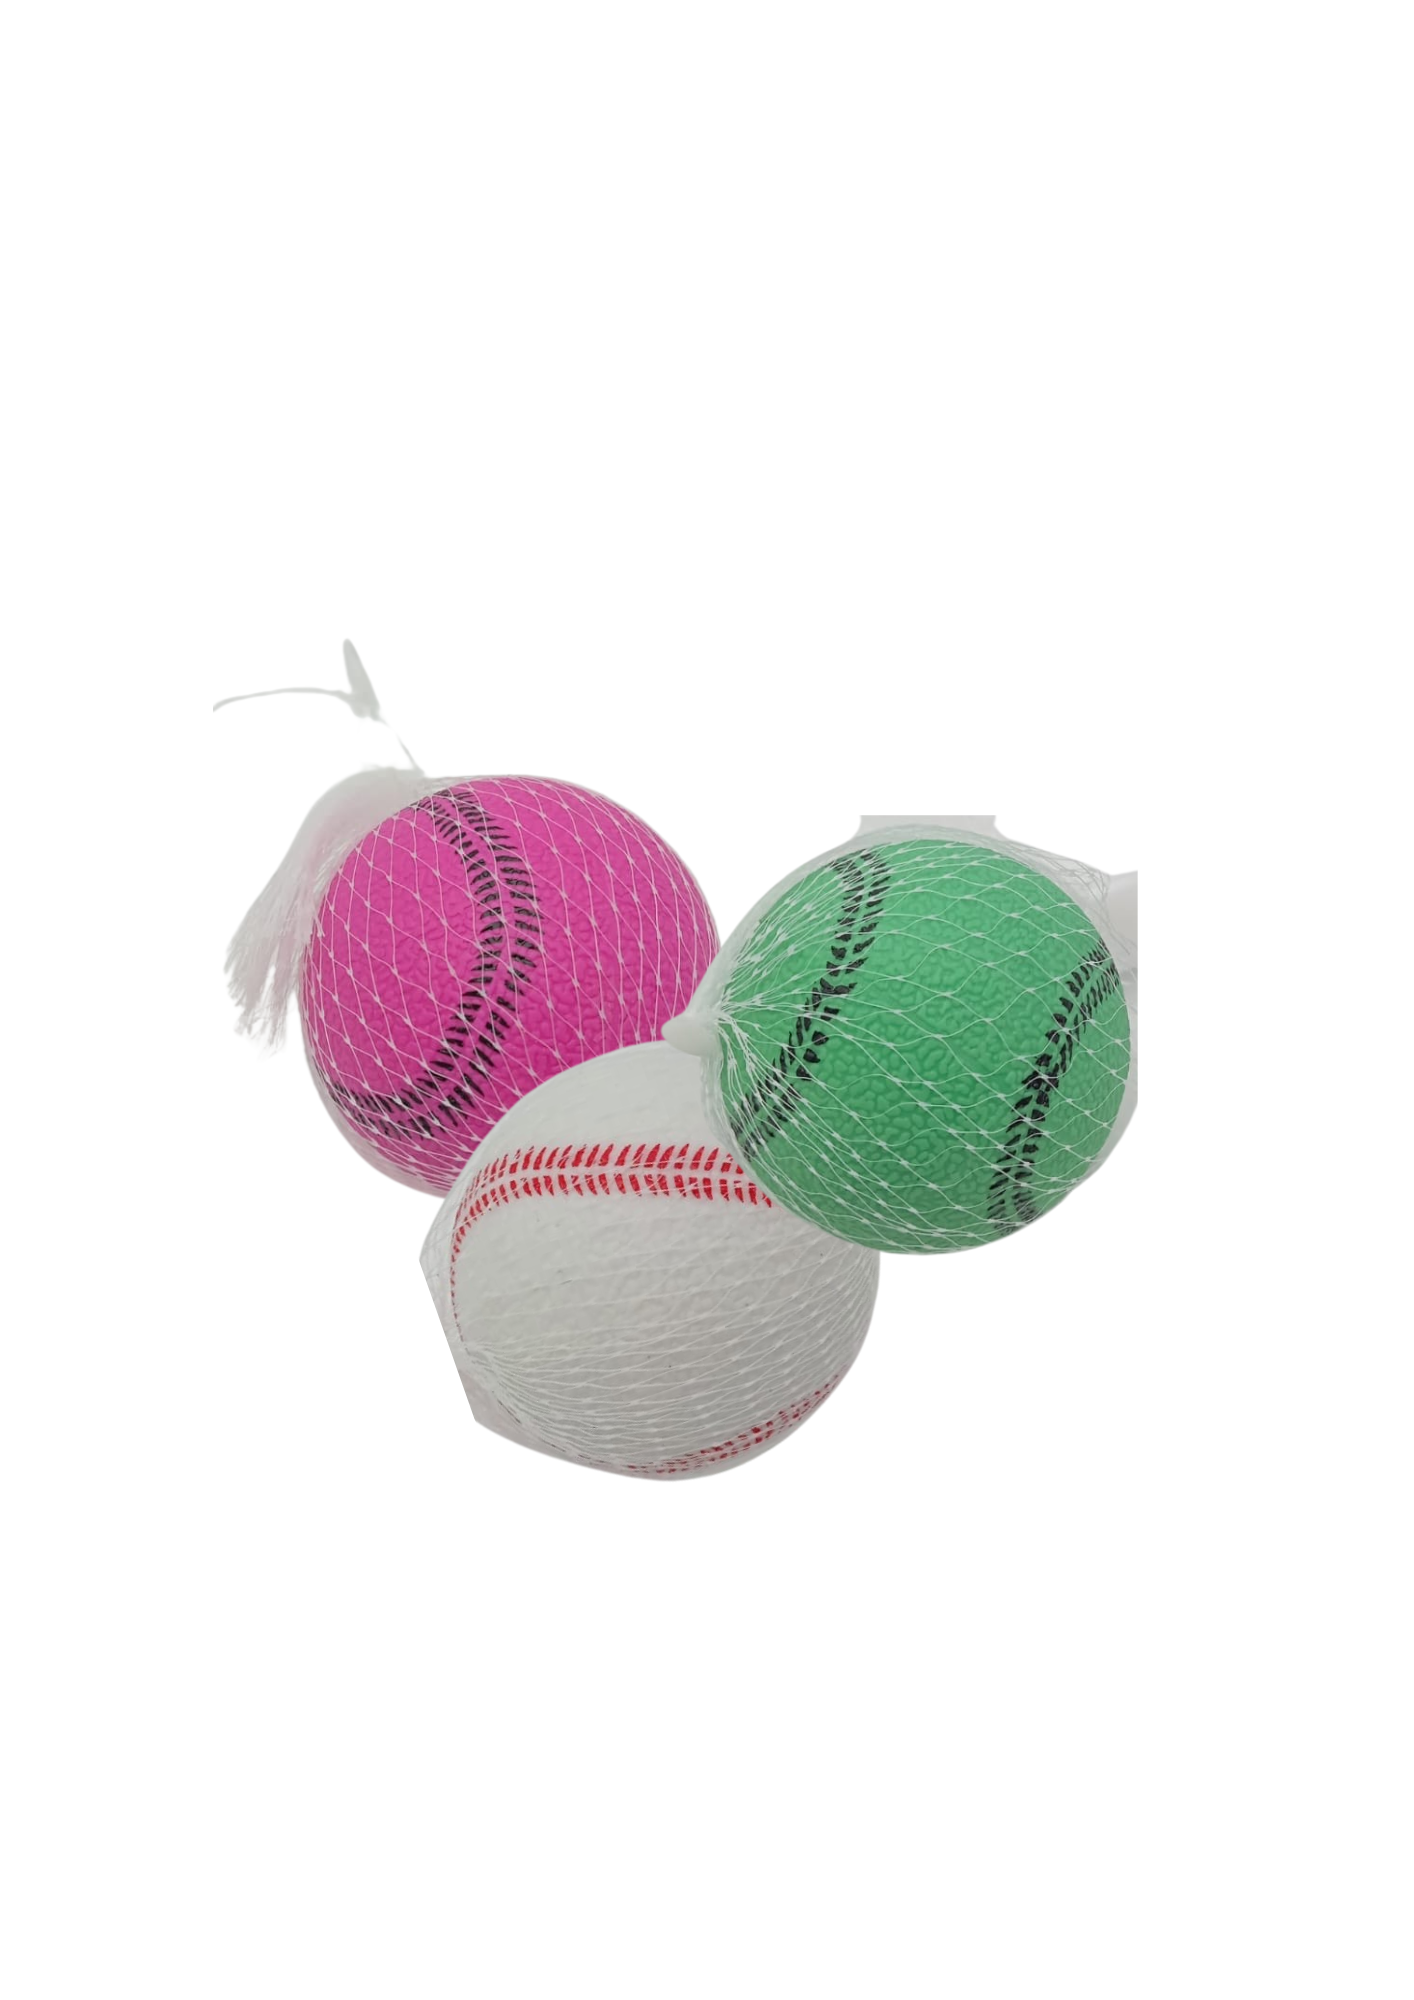 Dog Toy- Tenis Ball